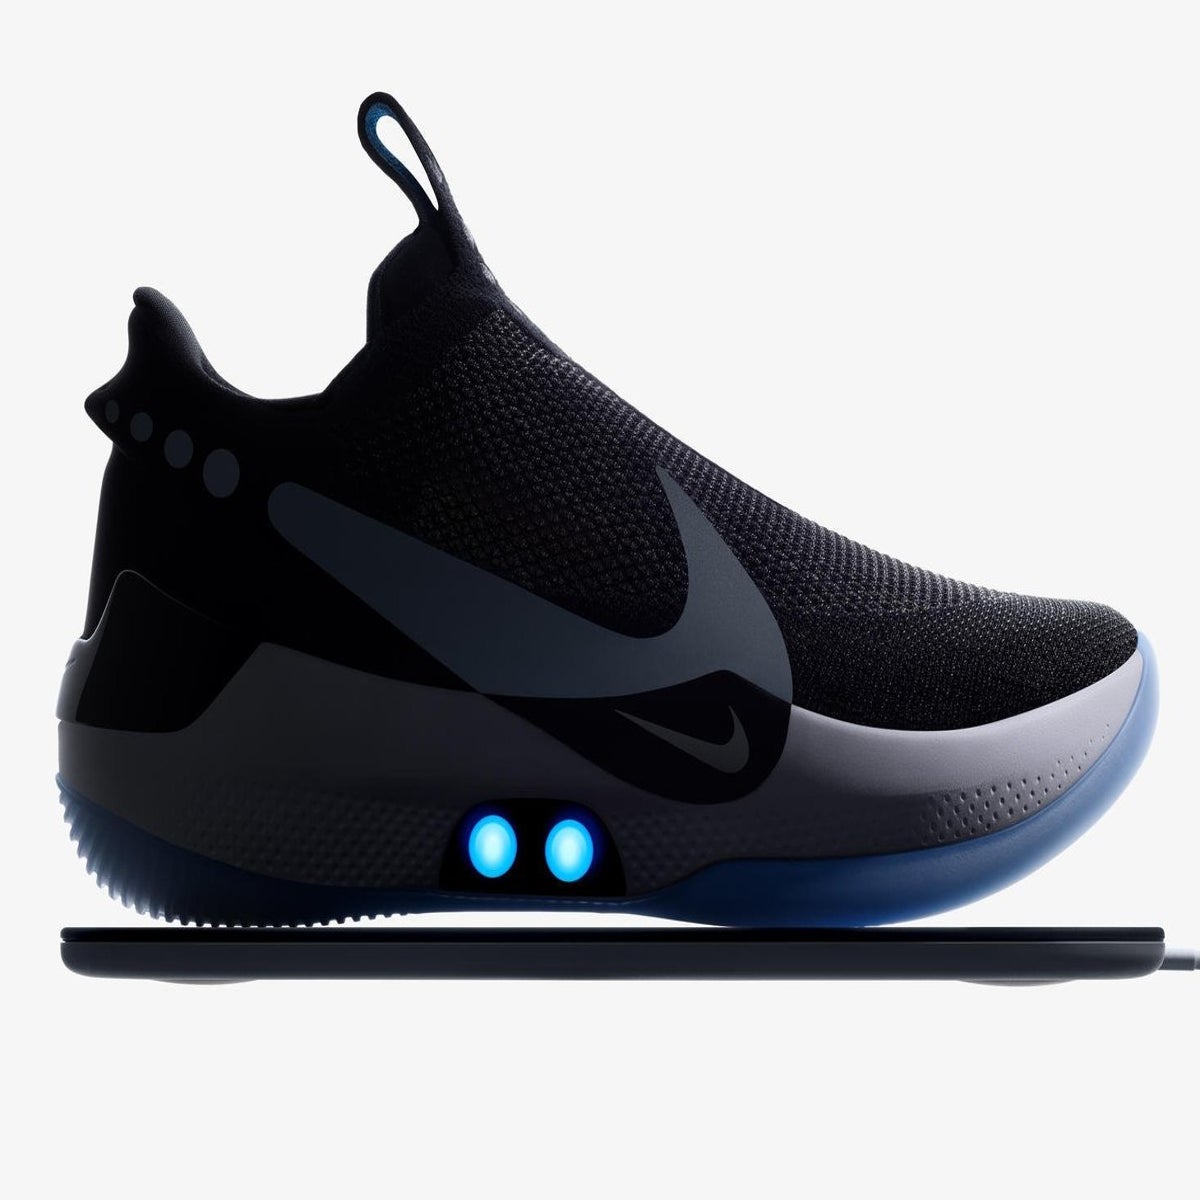 Nike unveils shoes which can controlled with a smartphone | The Independent | The Independent